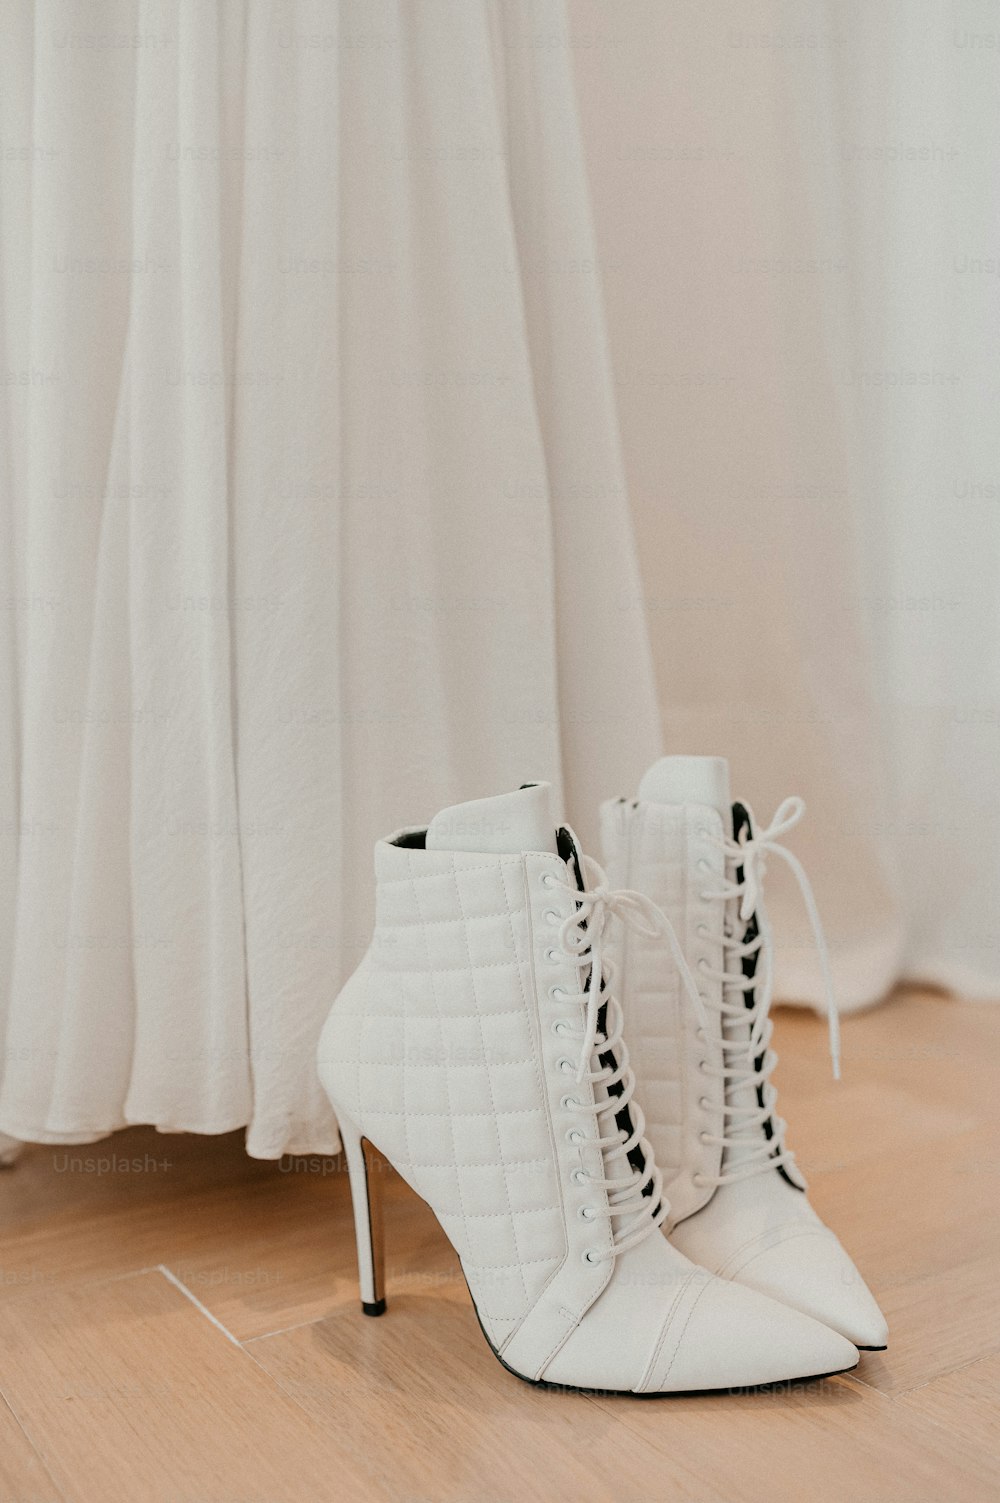 a pair of white high heeled shoes sitting on top of a wooden floor